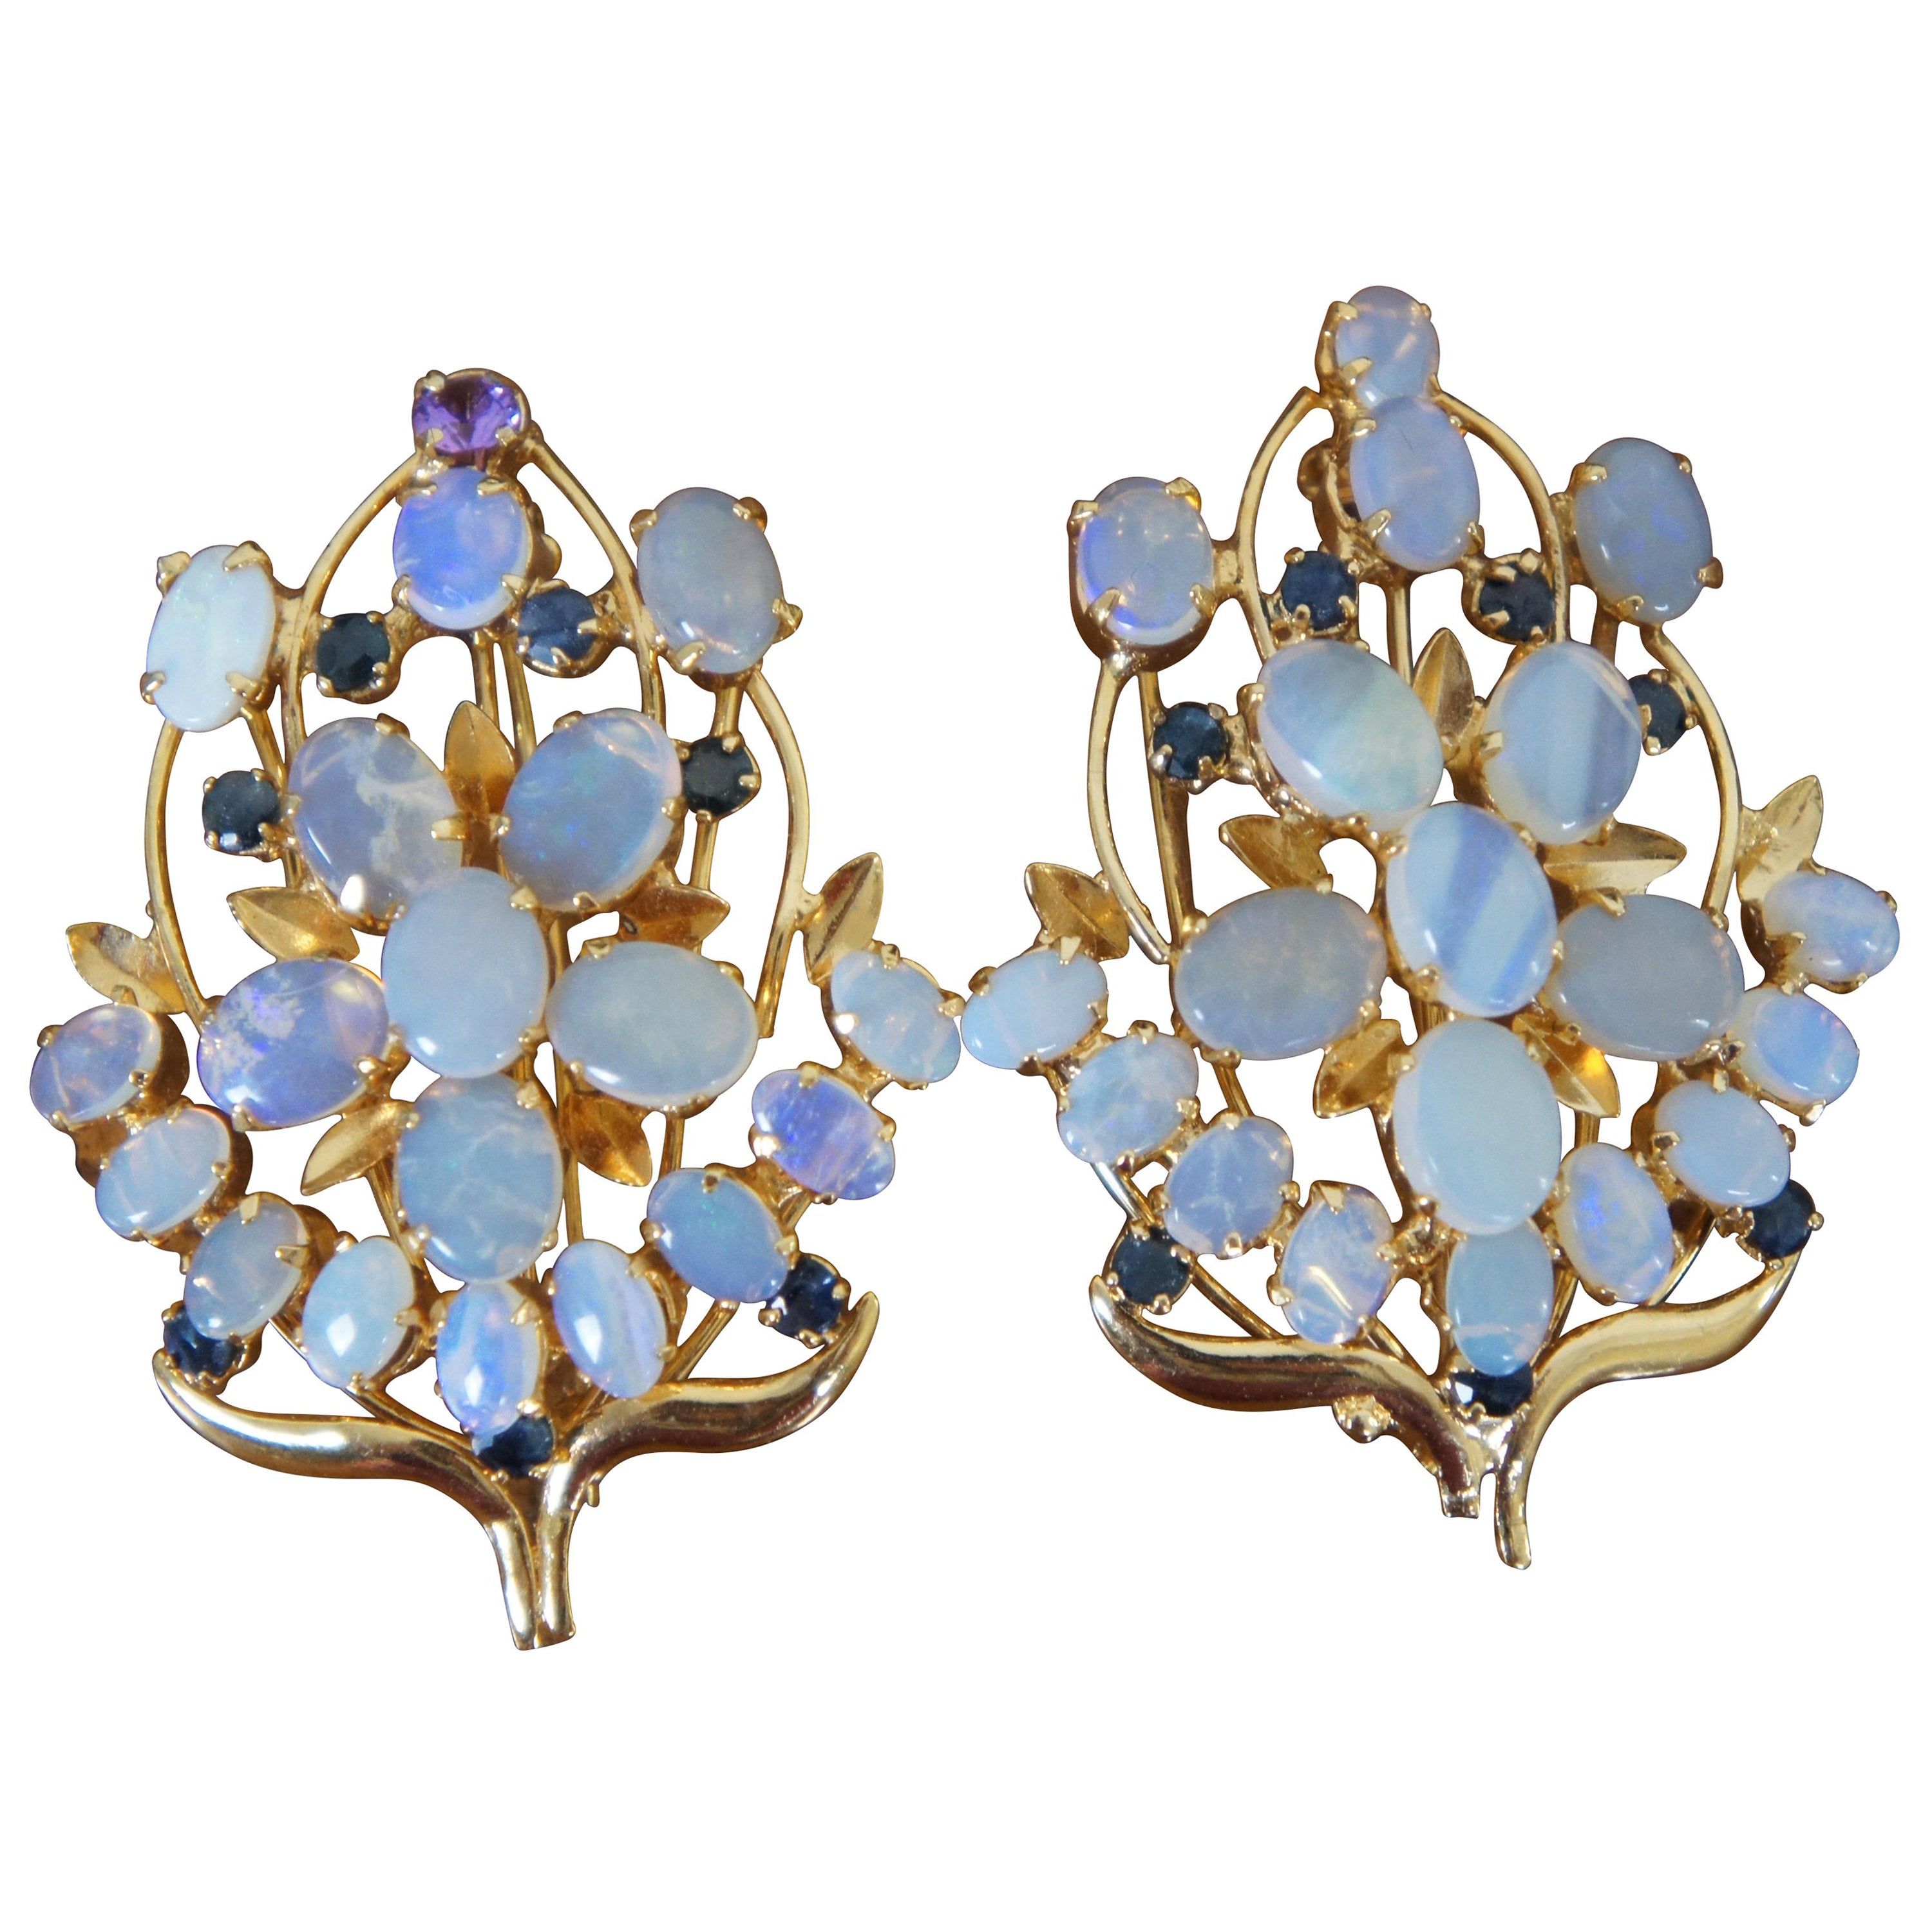 2 Midcentury Gold Tone Opal & Sapphire Floral Cluster Brooch Pendant Pins 2"